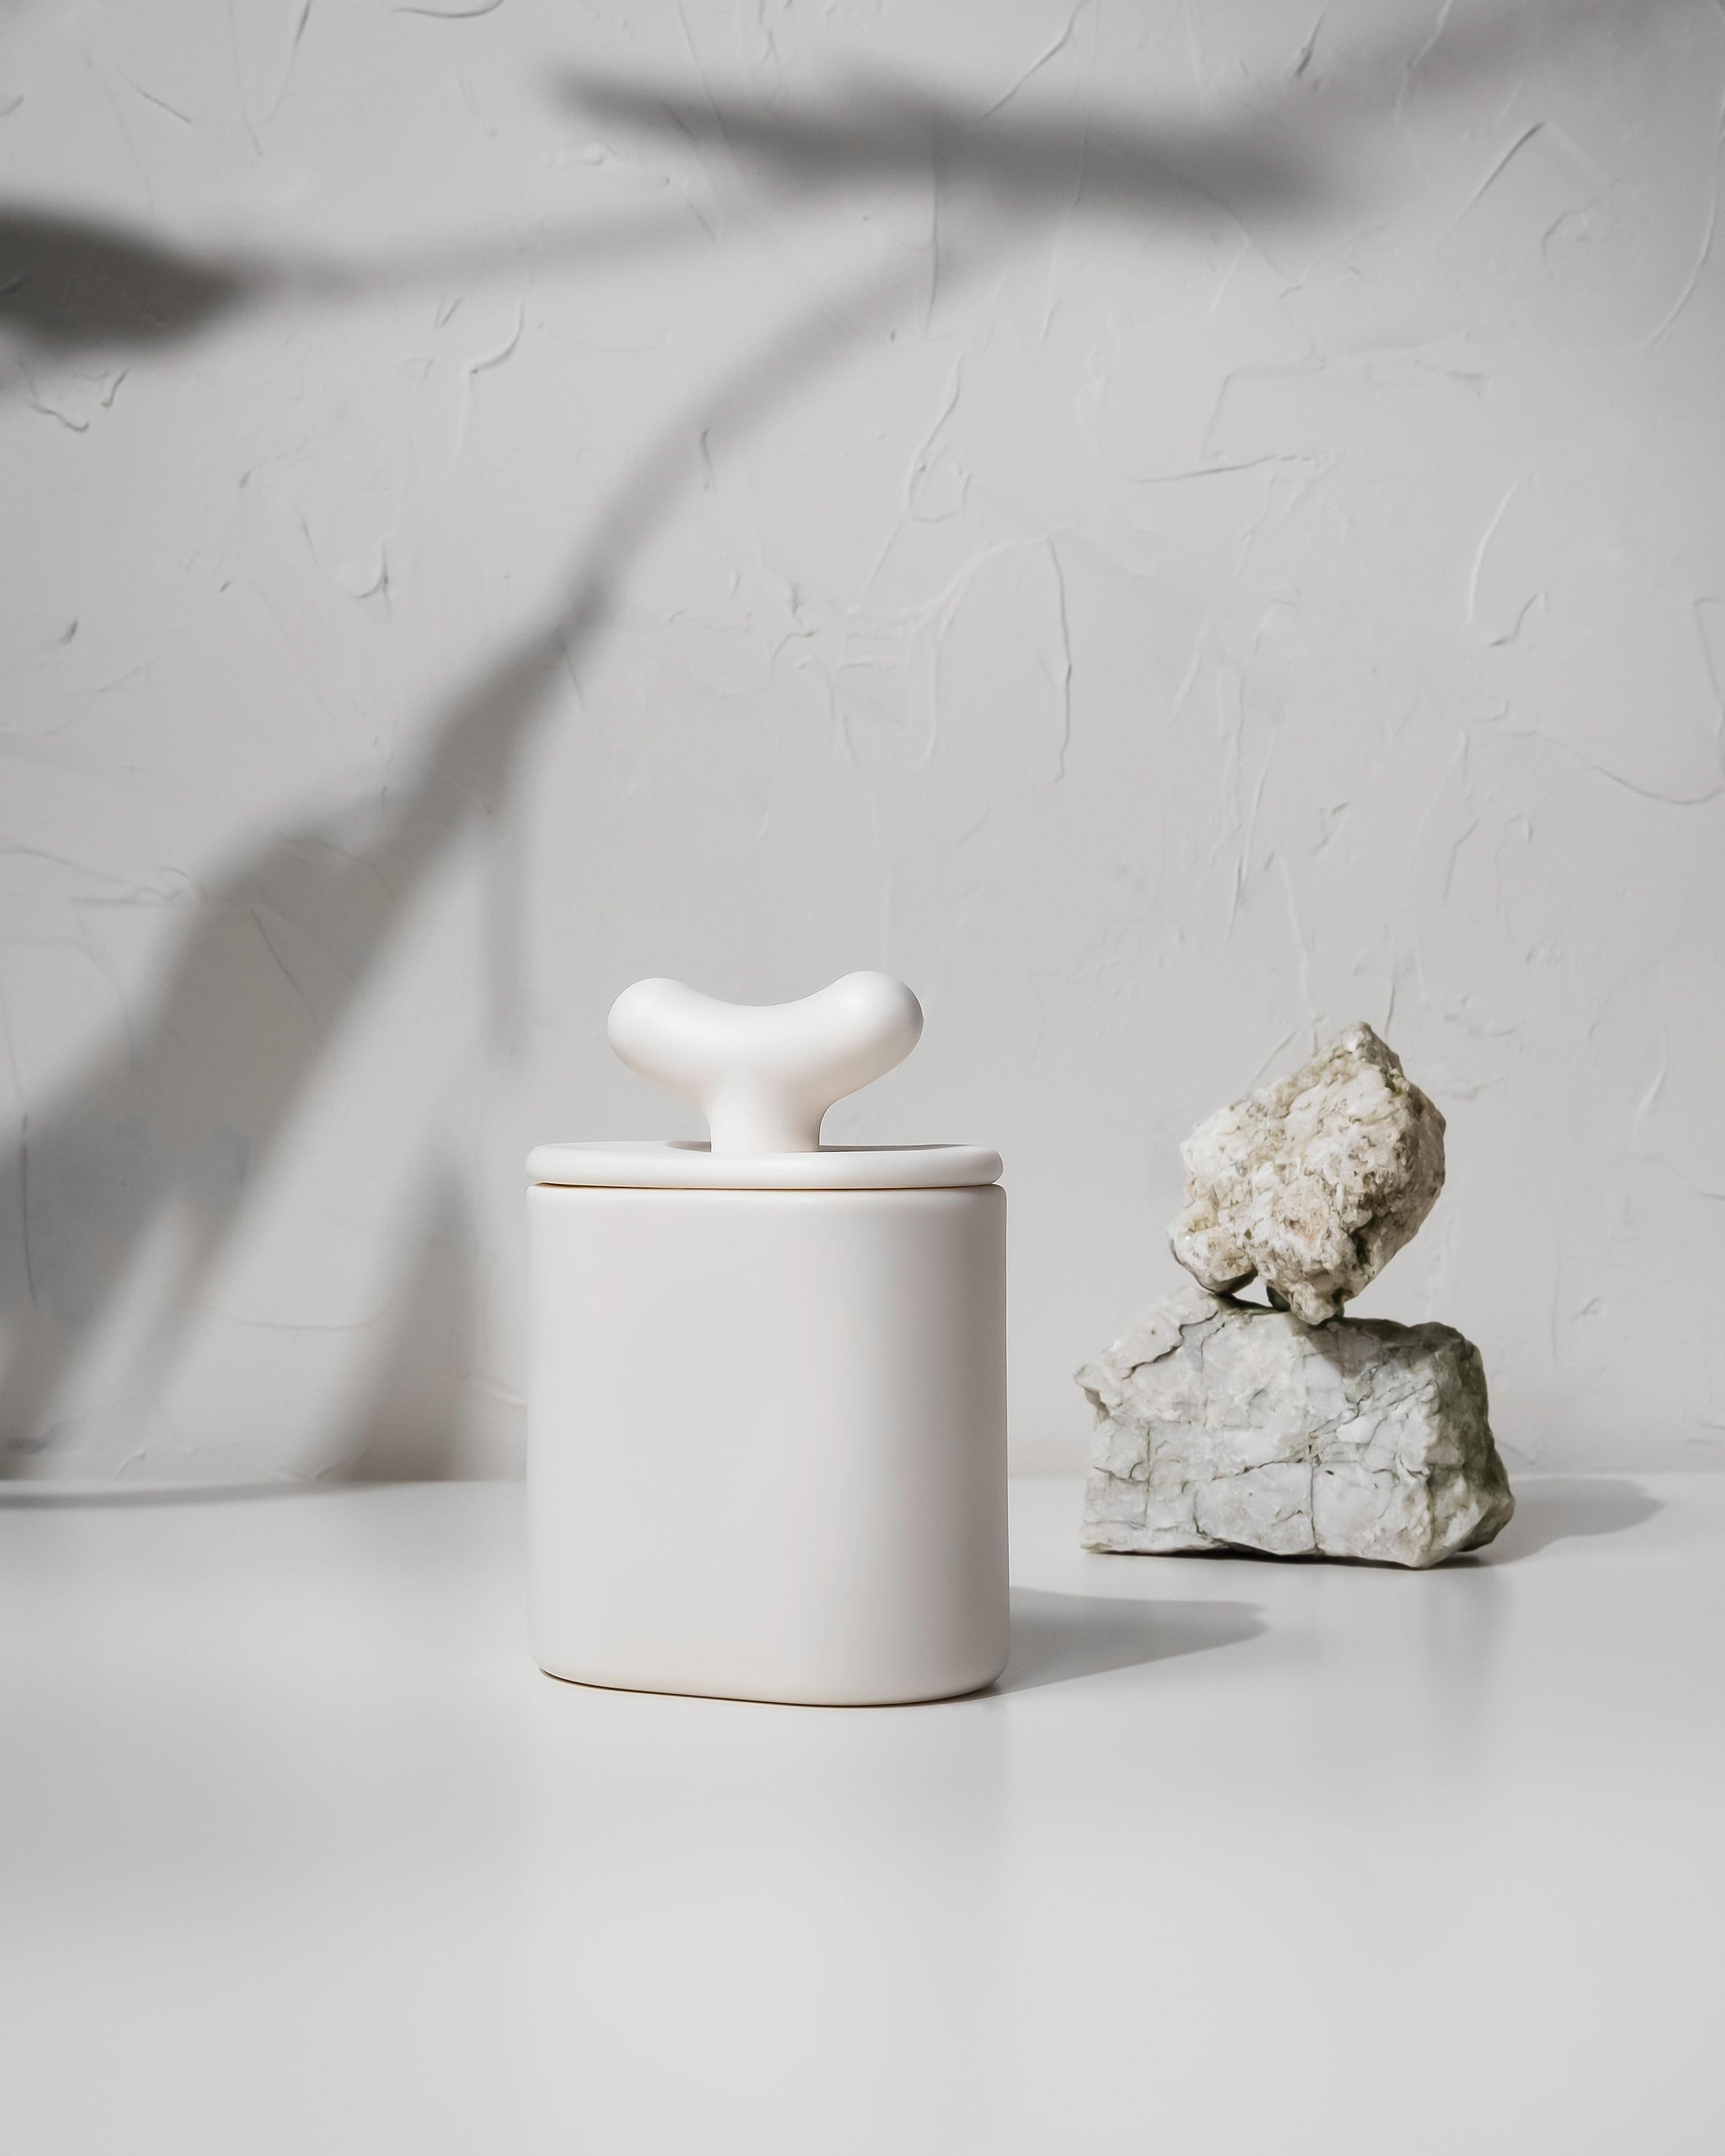 Akebia - minimalist ceramic container, Parian porcelain. The Japanese fruit of Akebia inspires the handle shape.

A collection inspired by nature and classical forms.

Parian porcelain vessels, unglazed.

• 160 g natural soy wax

• app 30 h burn